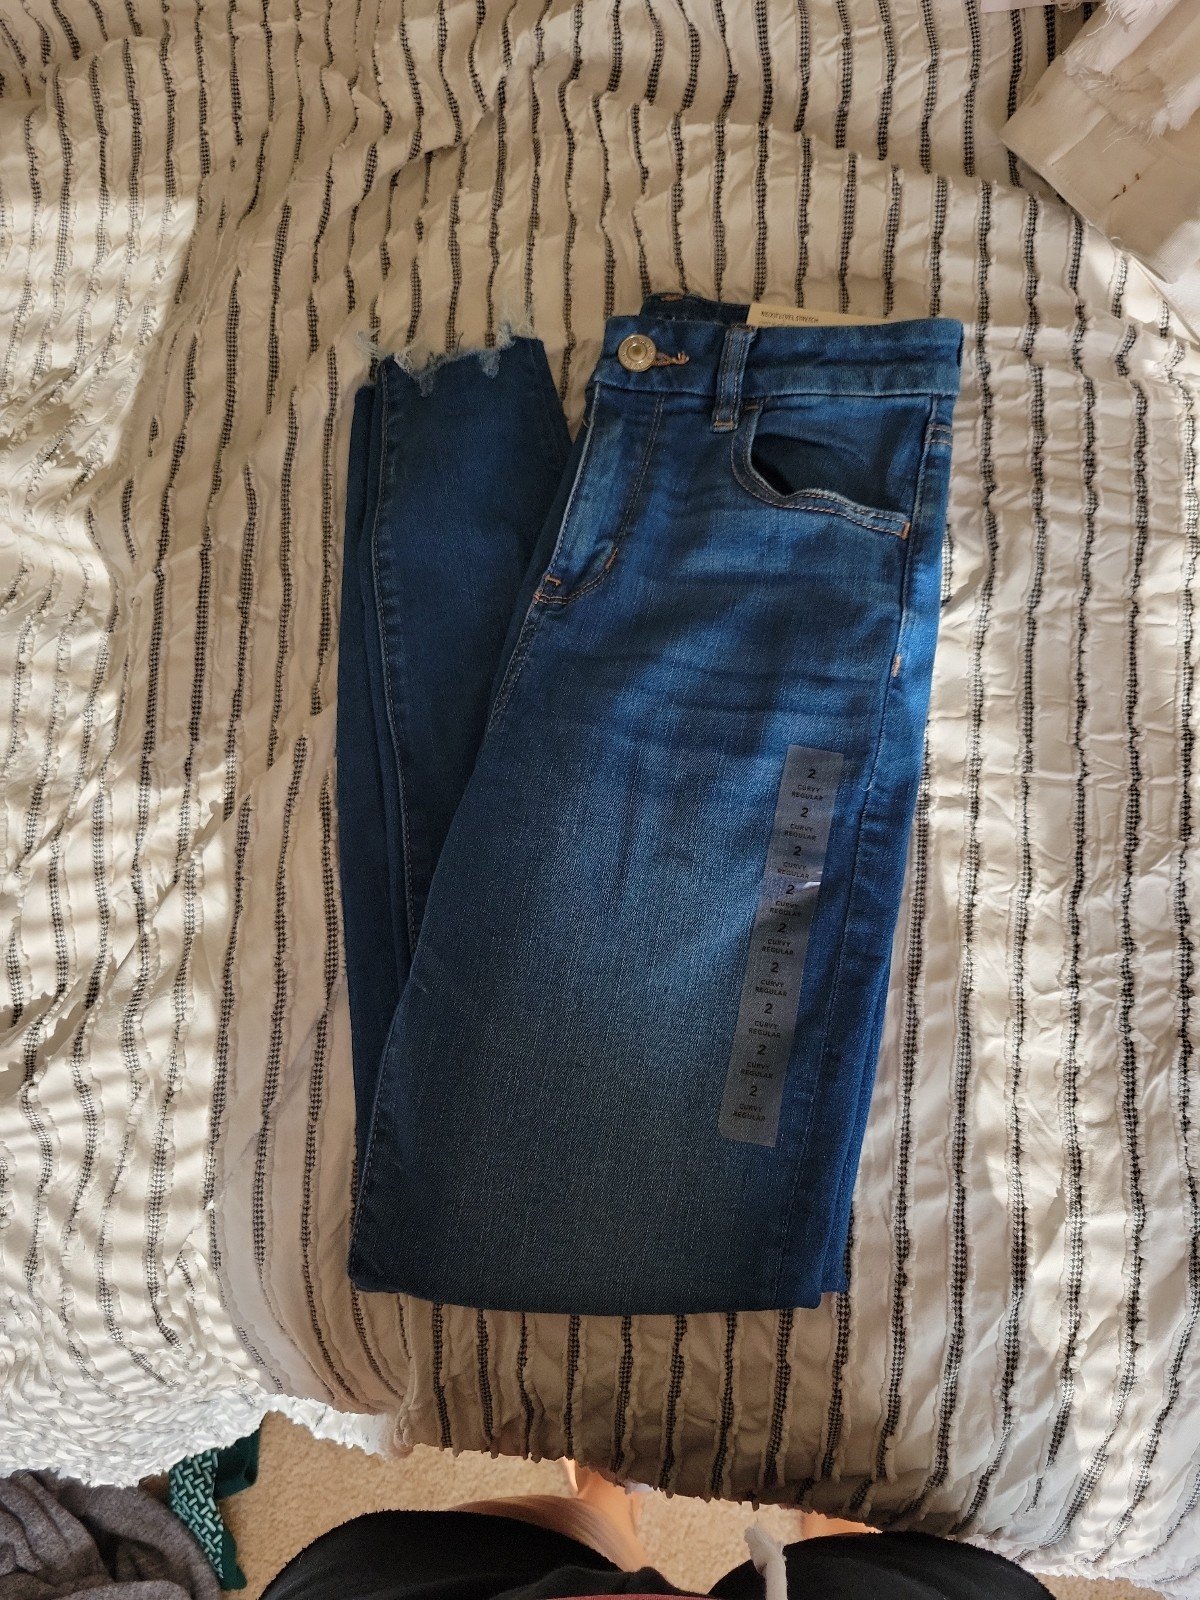 Personality NWT AE jeans size 2 regular nMt7EVMeY Store